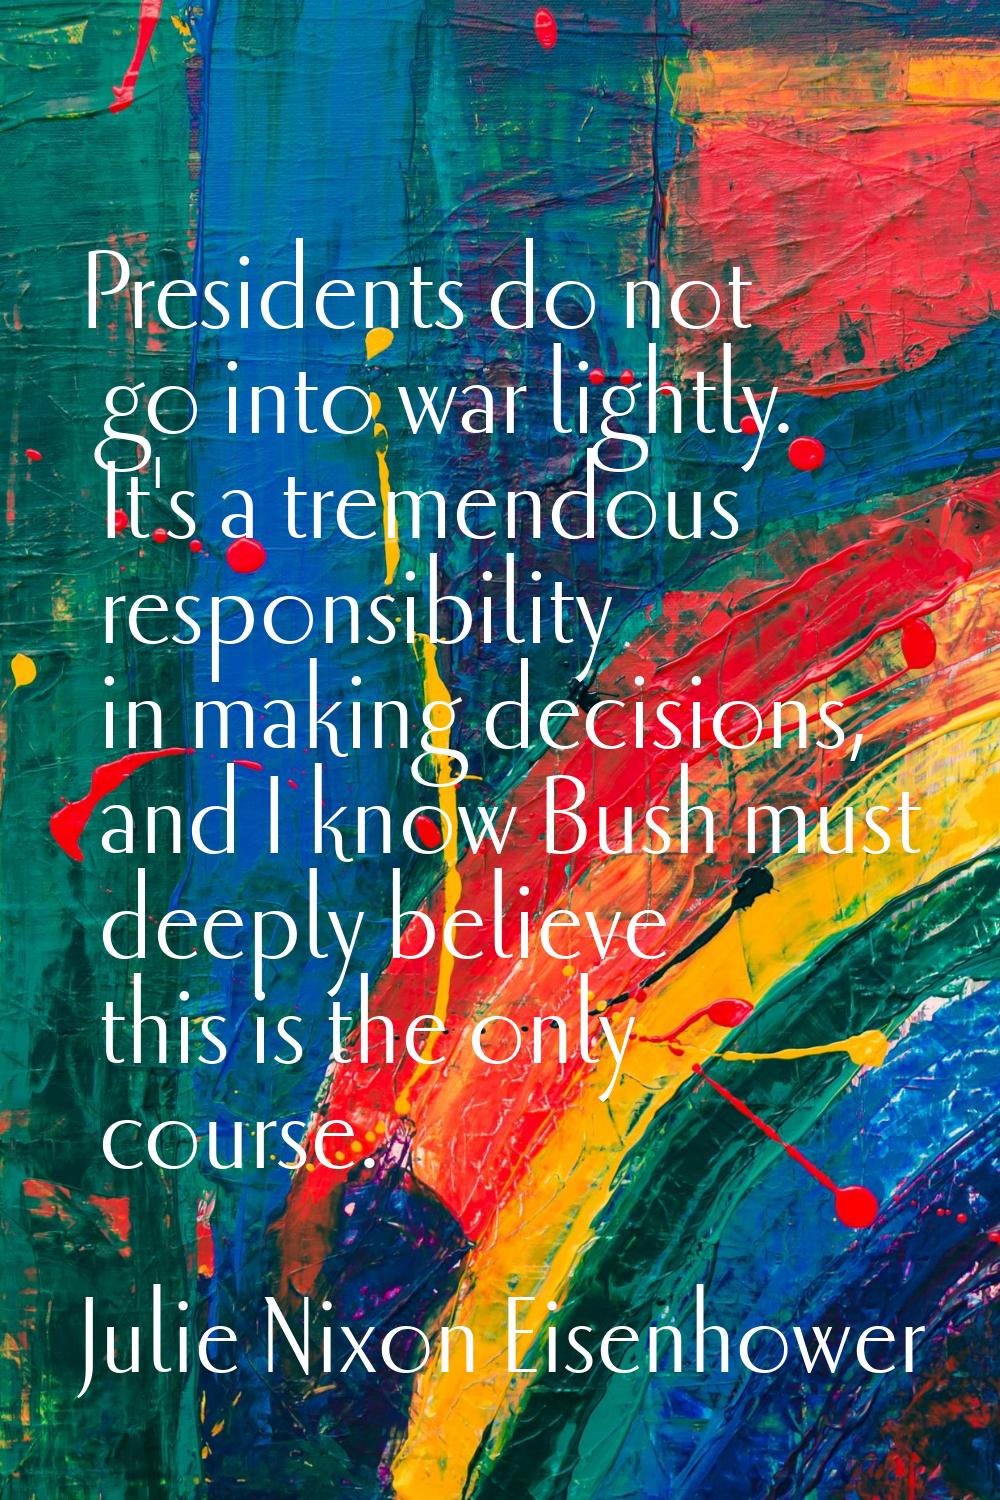 Presidents do not go into war lightly. It's a tremendous responsibility in making decisions, and I 